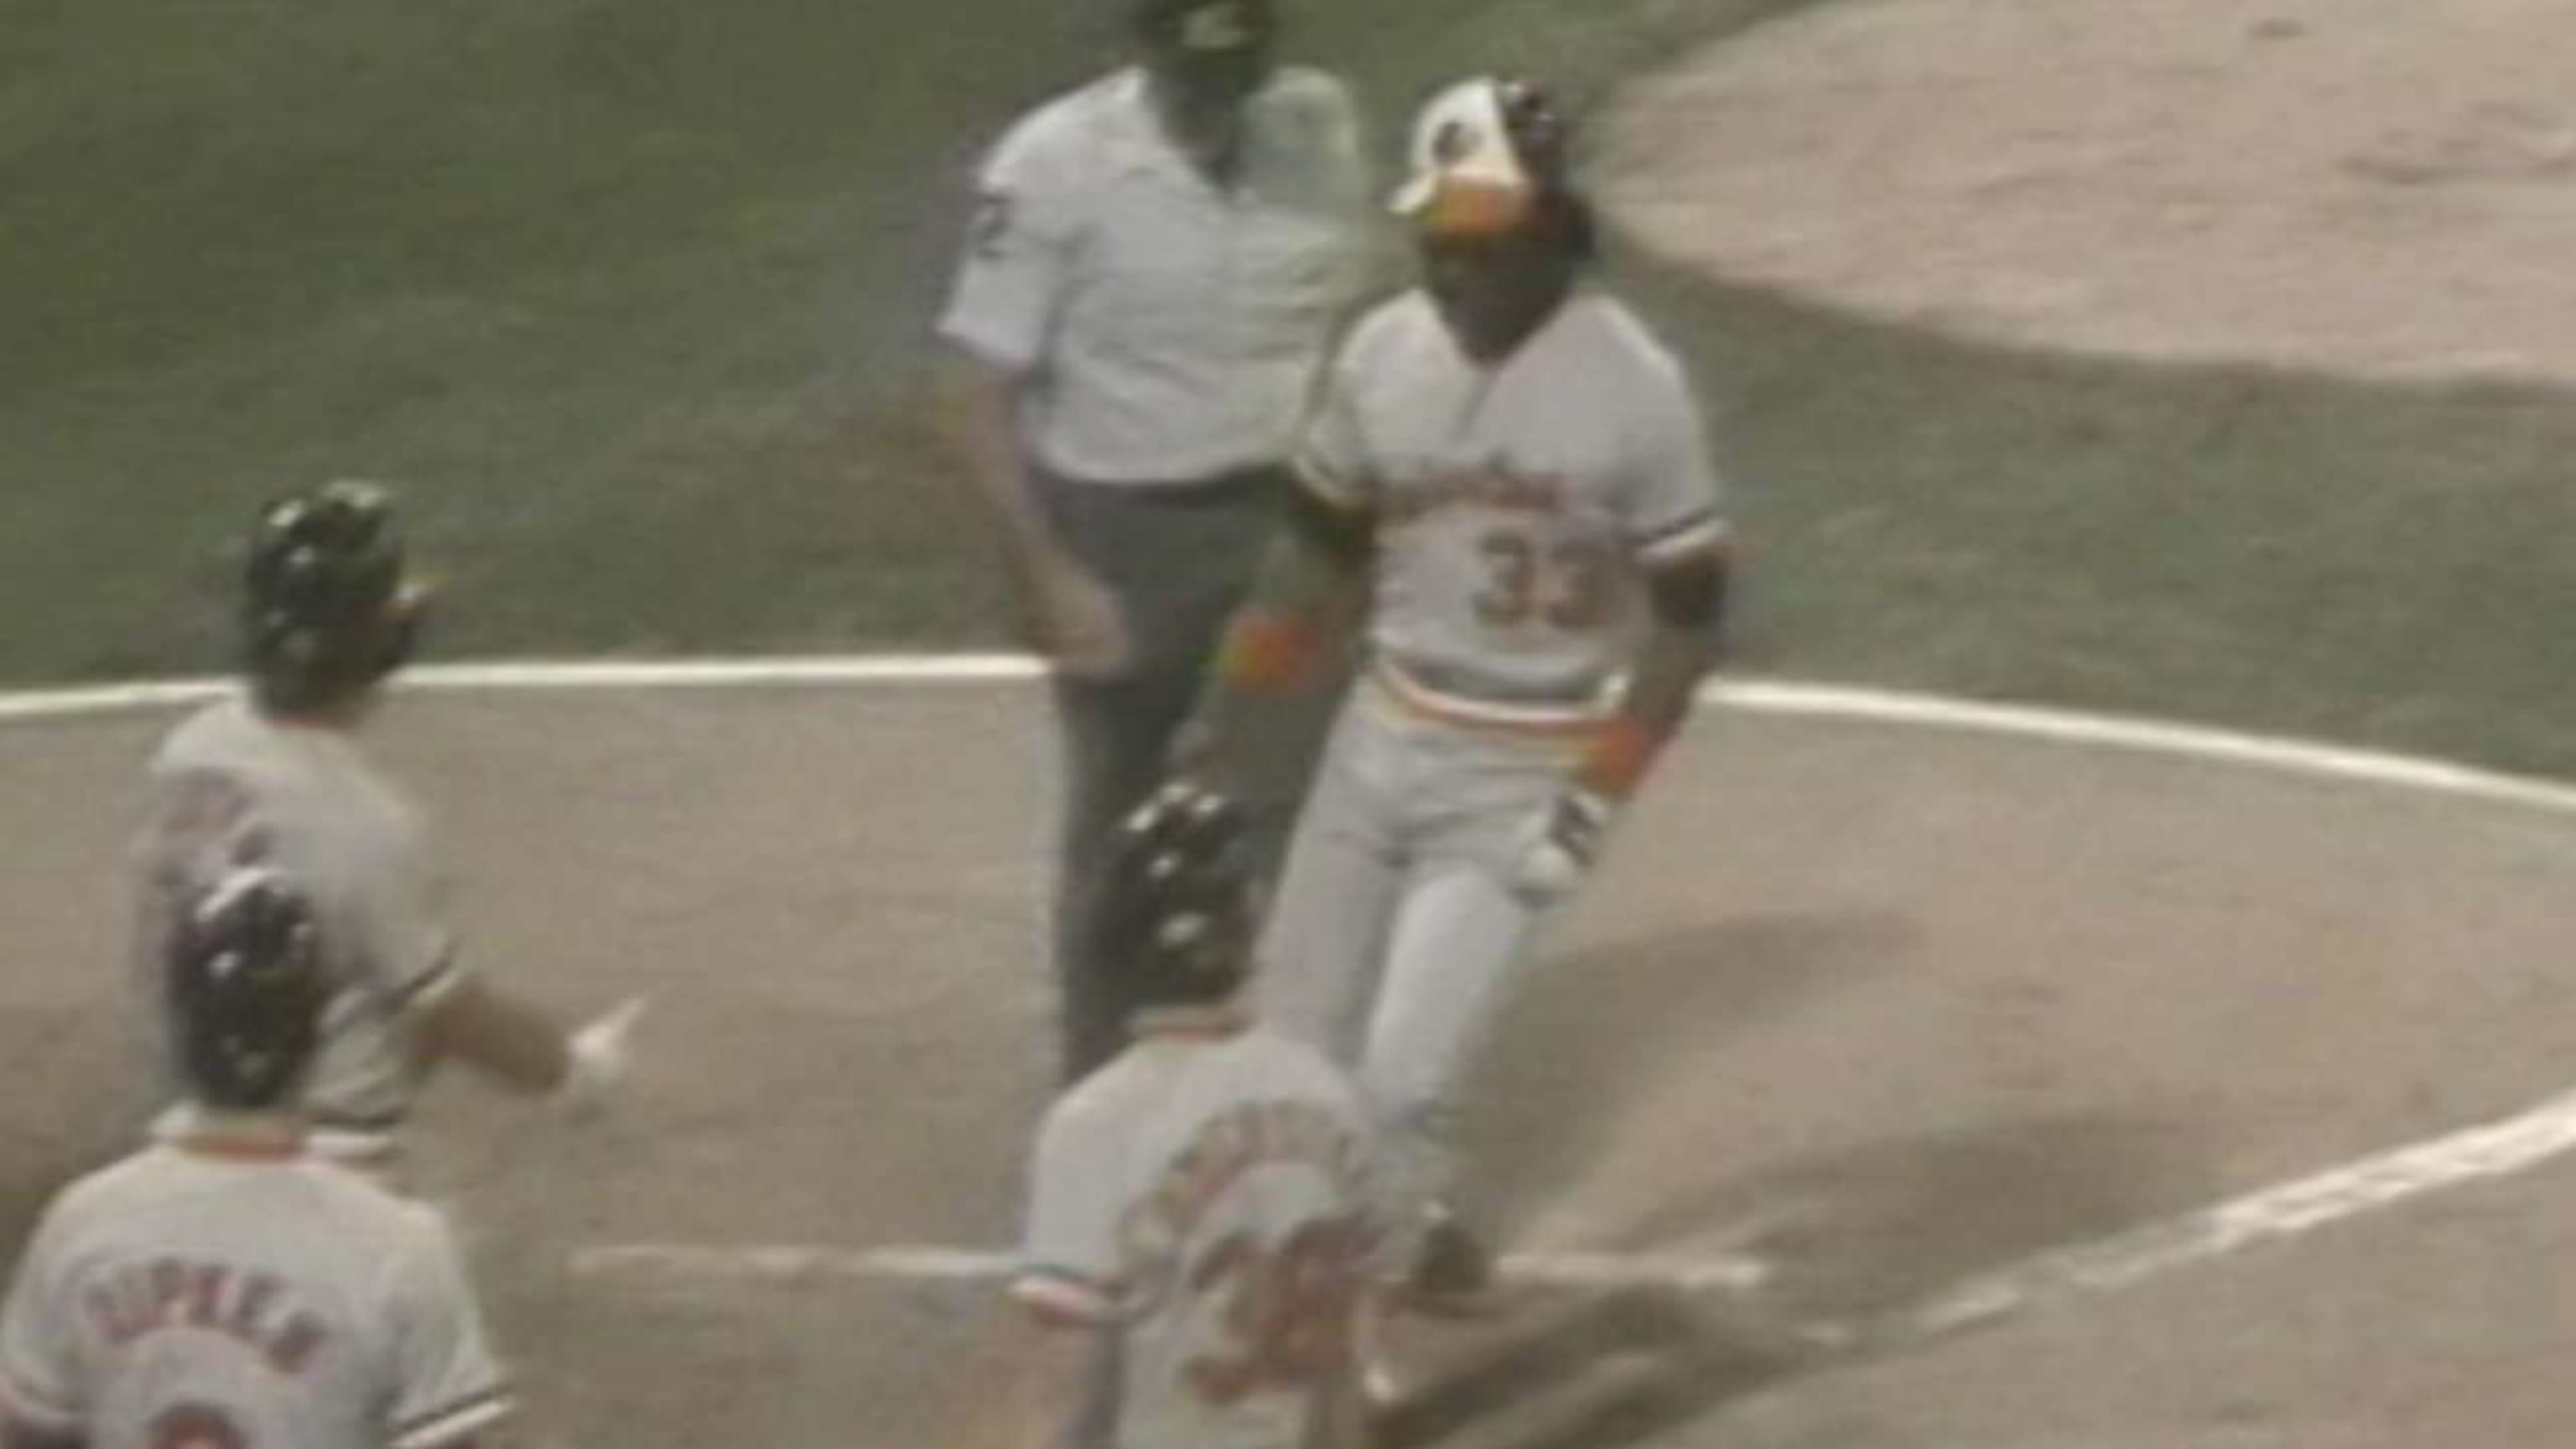 CLASSIC EDDIE MURRAY ORIOLES HALL OF FAME GREAT AT BAT IN THIS